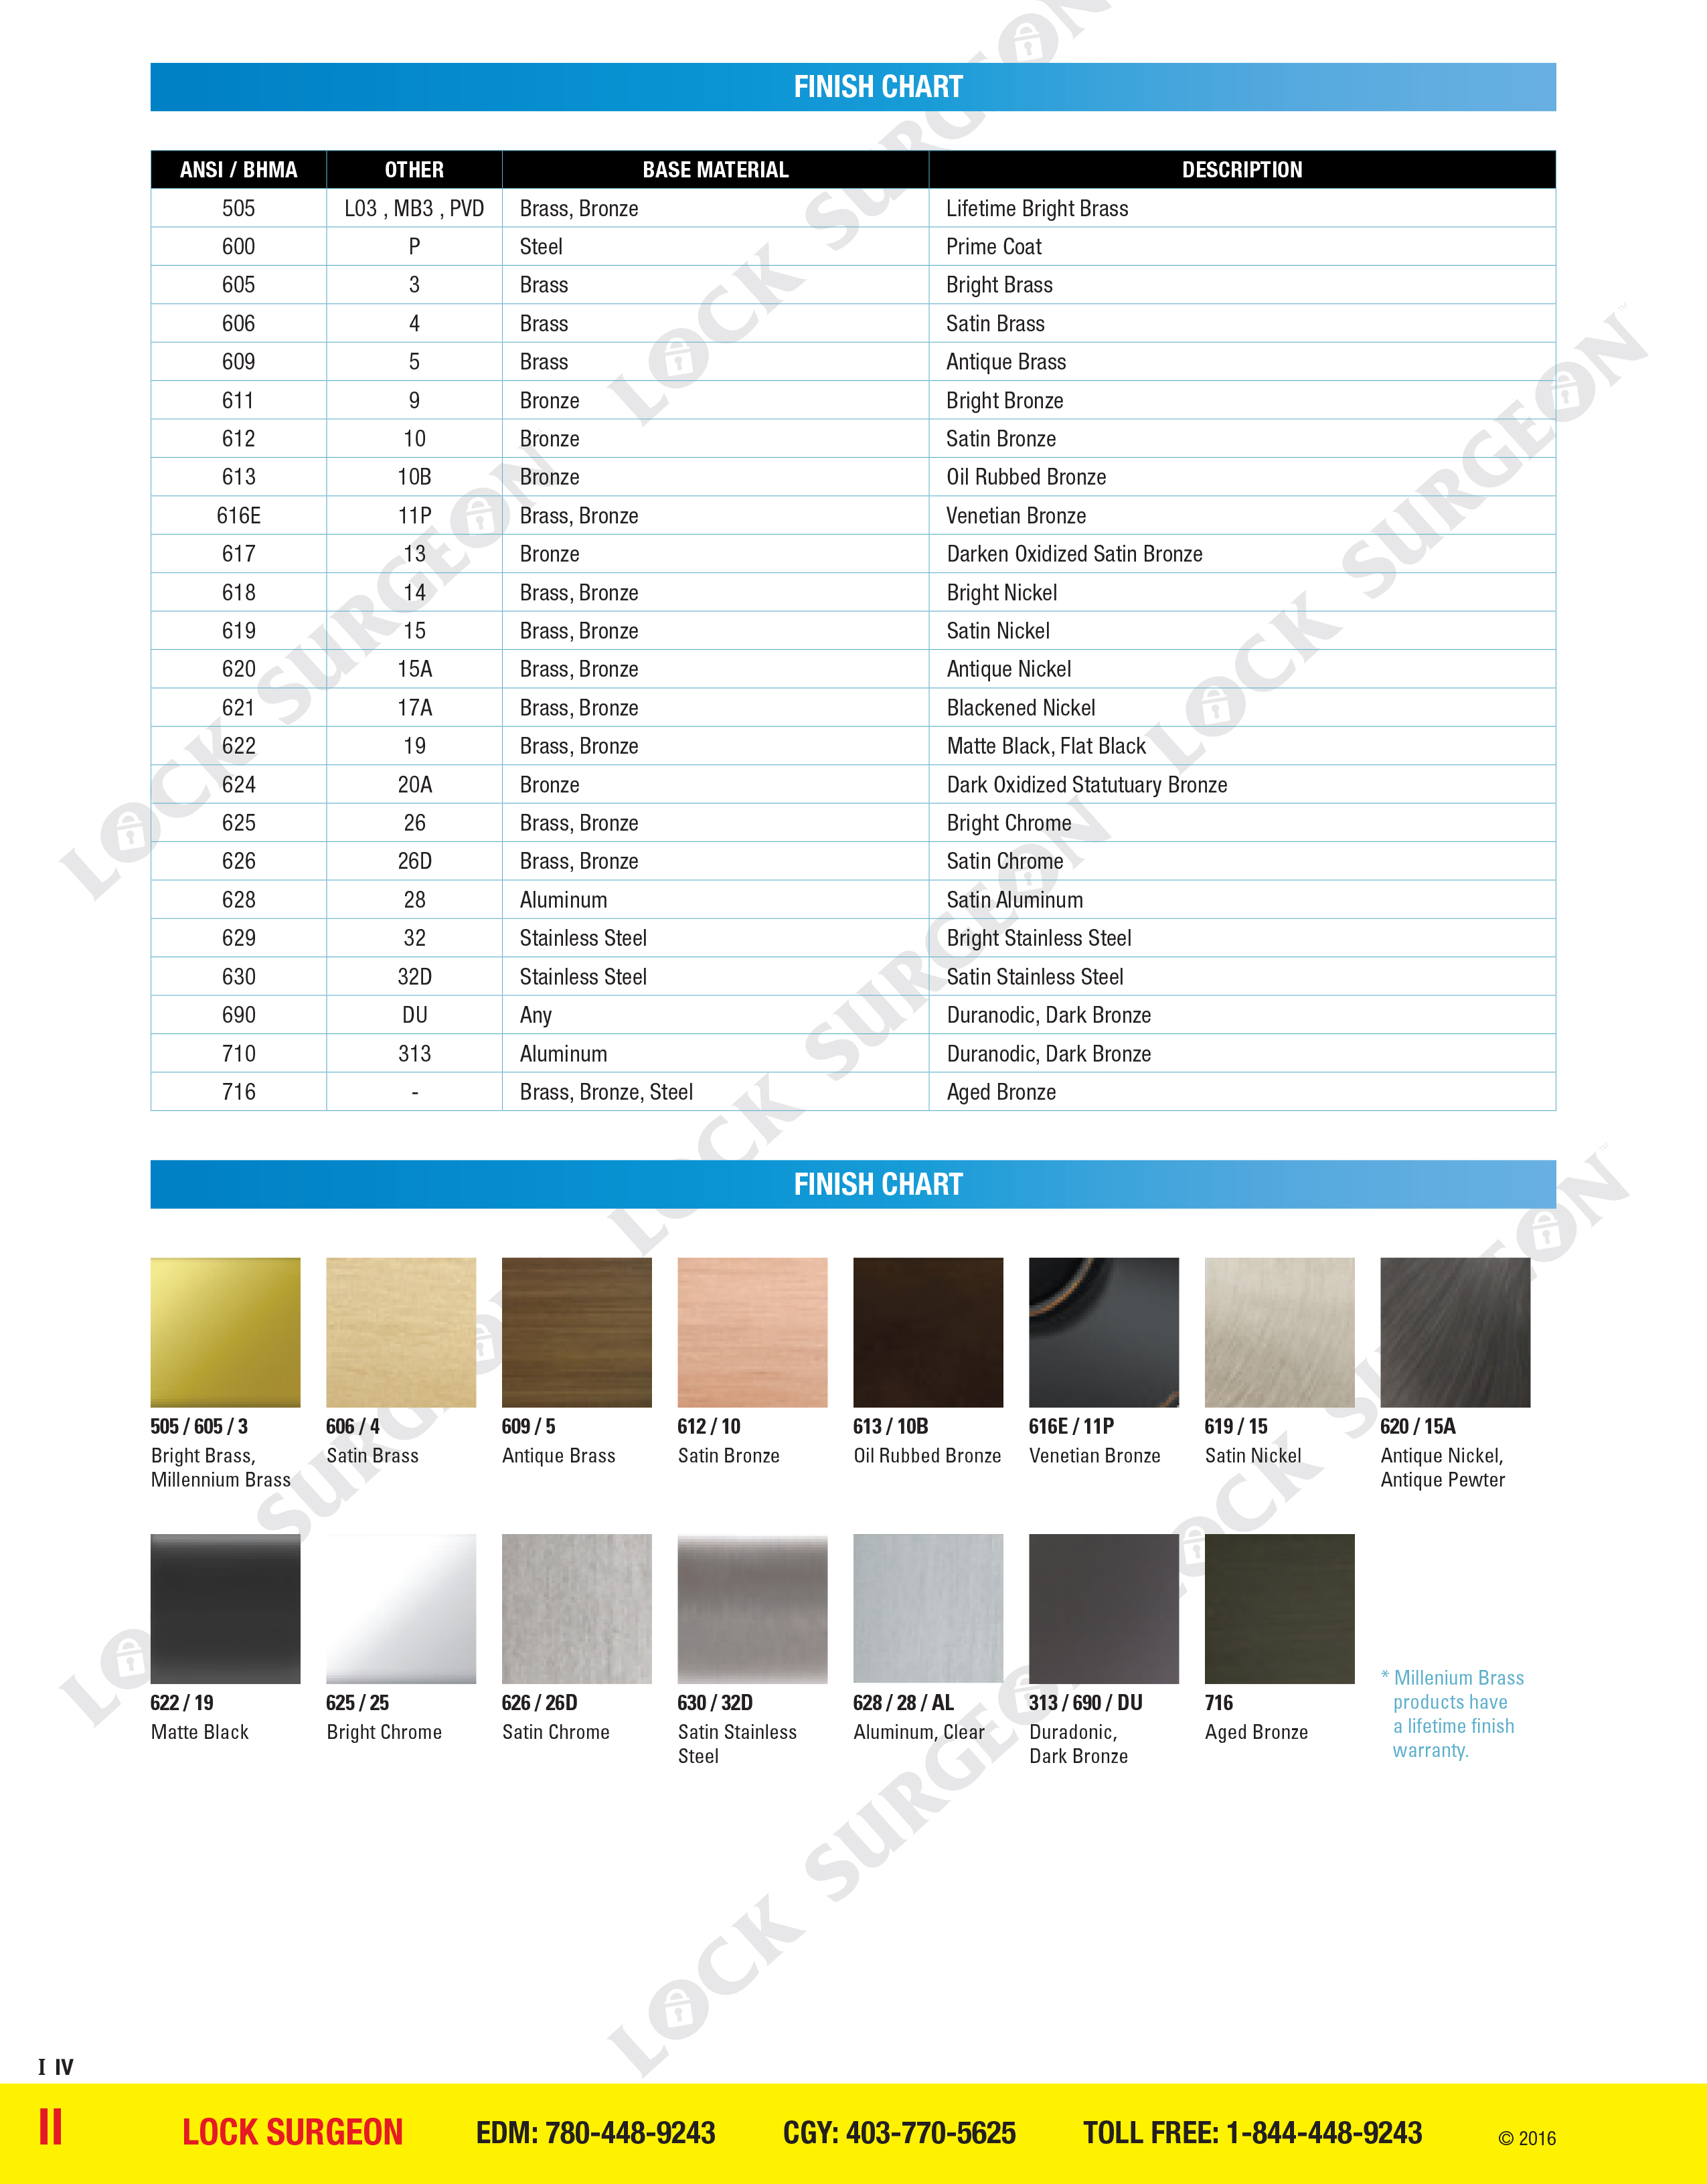 Acheson reference chart displays for product finishes.